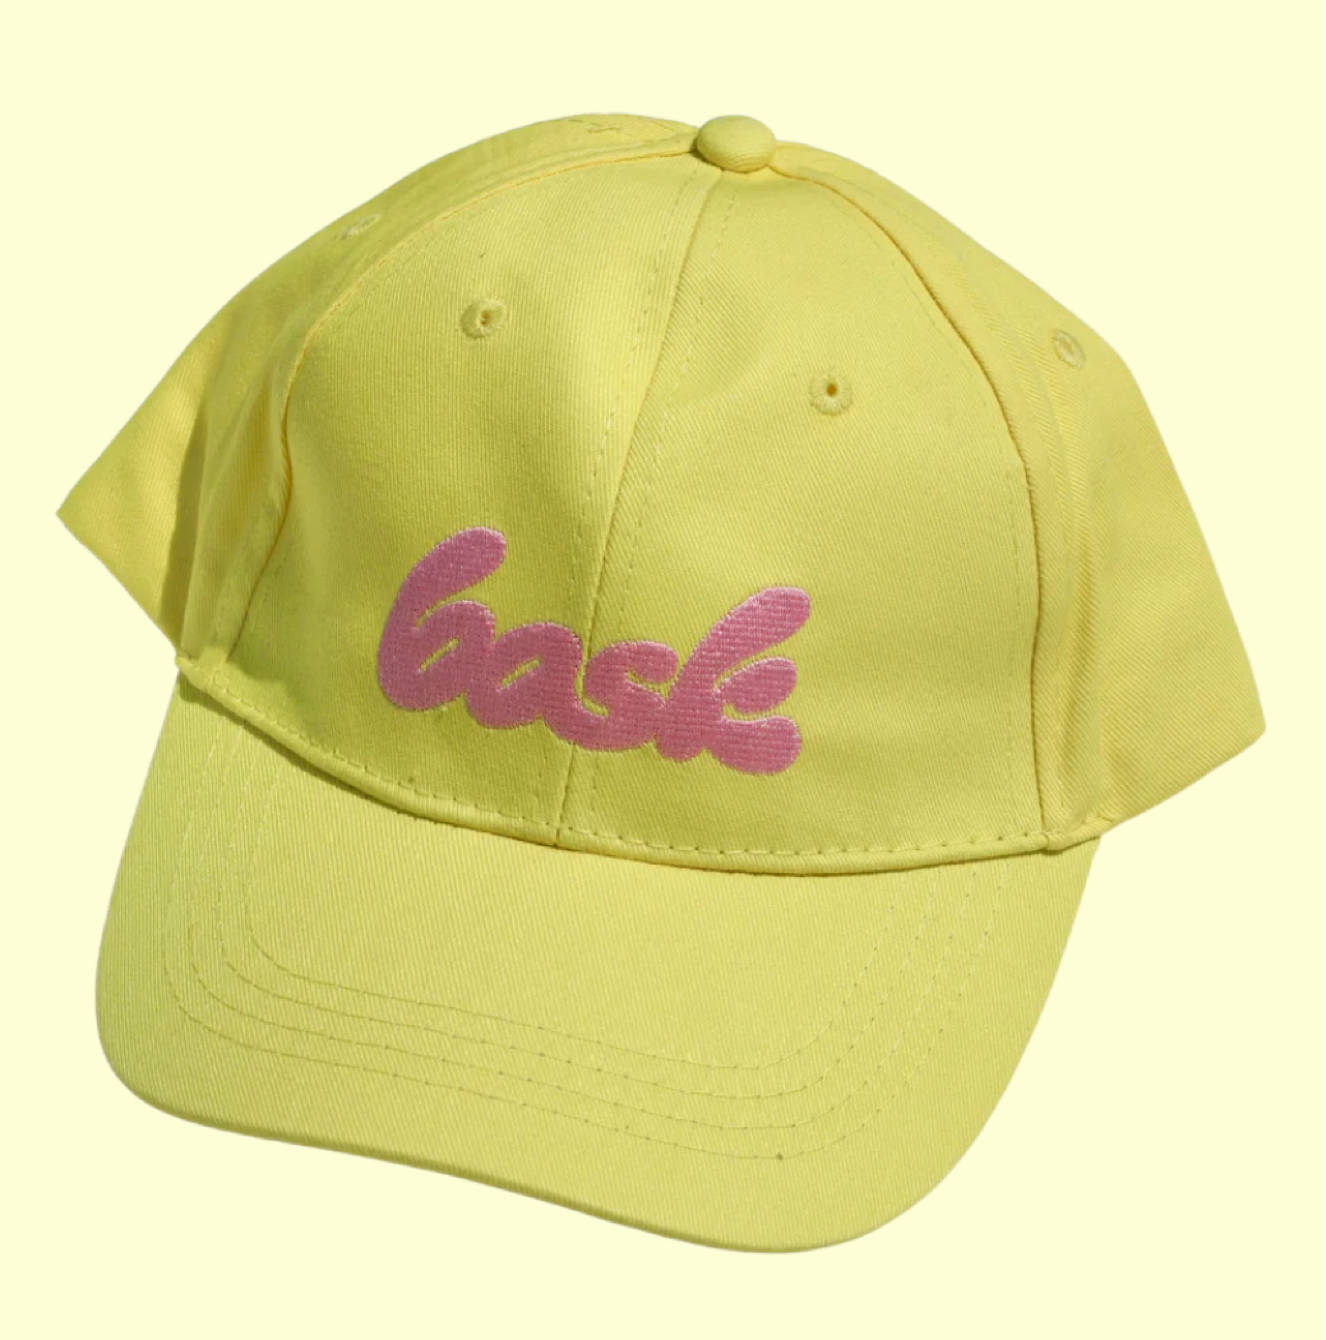 The Bask Hat